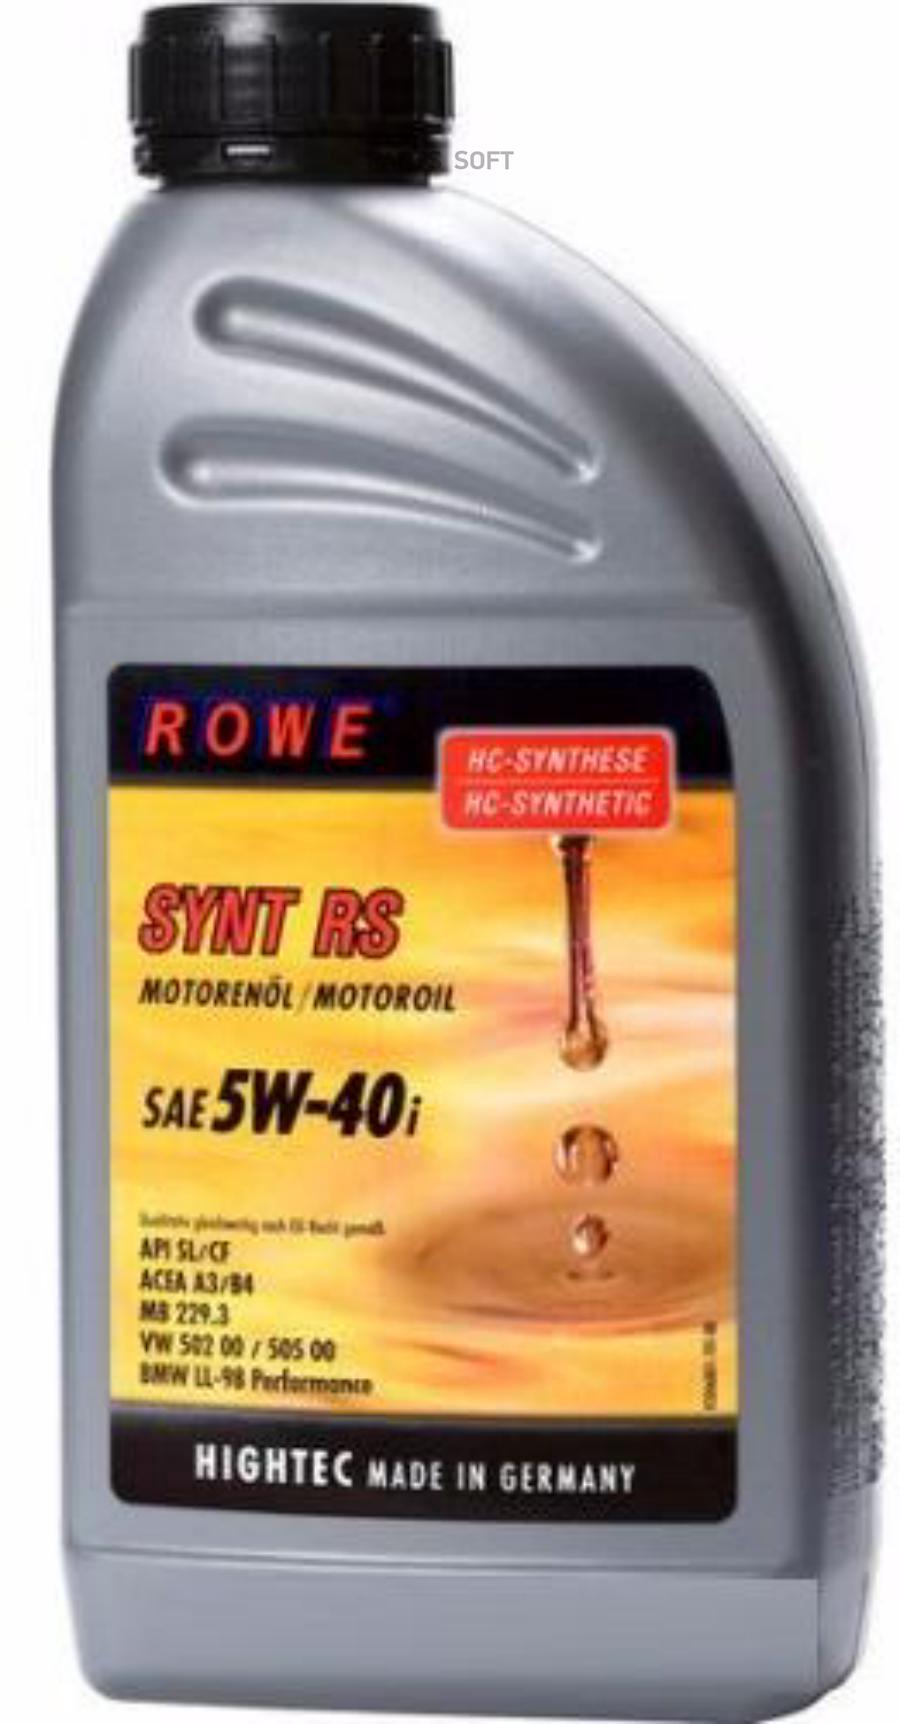 Rowe atf. Rowe Hightec Synt RS DLS 5w30. Масло Rowe 5w40 Hightec Synt 5-40. Rowe Hightec ATF 9600 1 Л. Hightec Synt RS DLS SAE 5w-30.